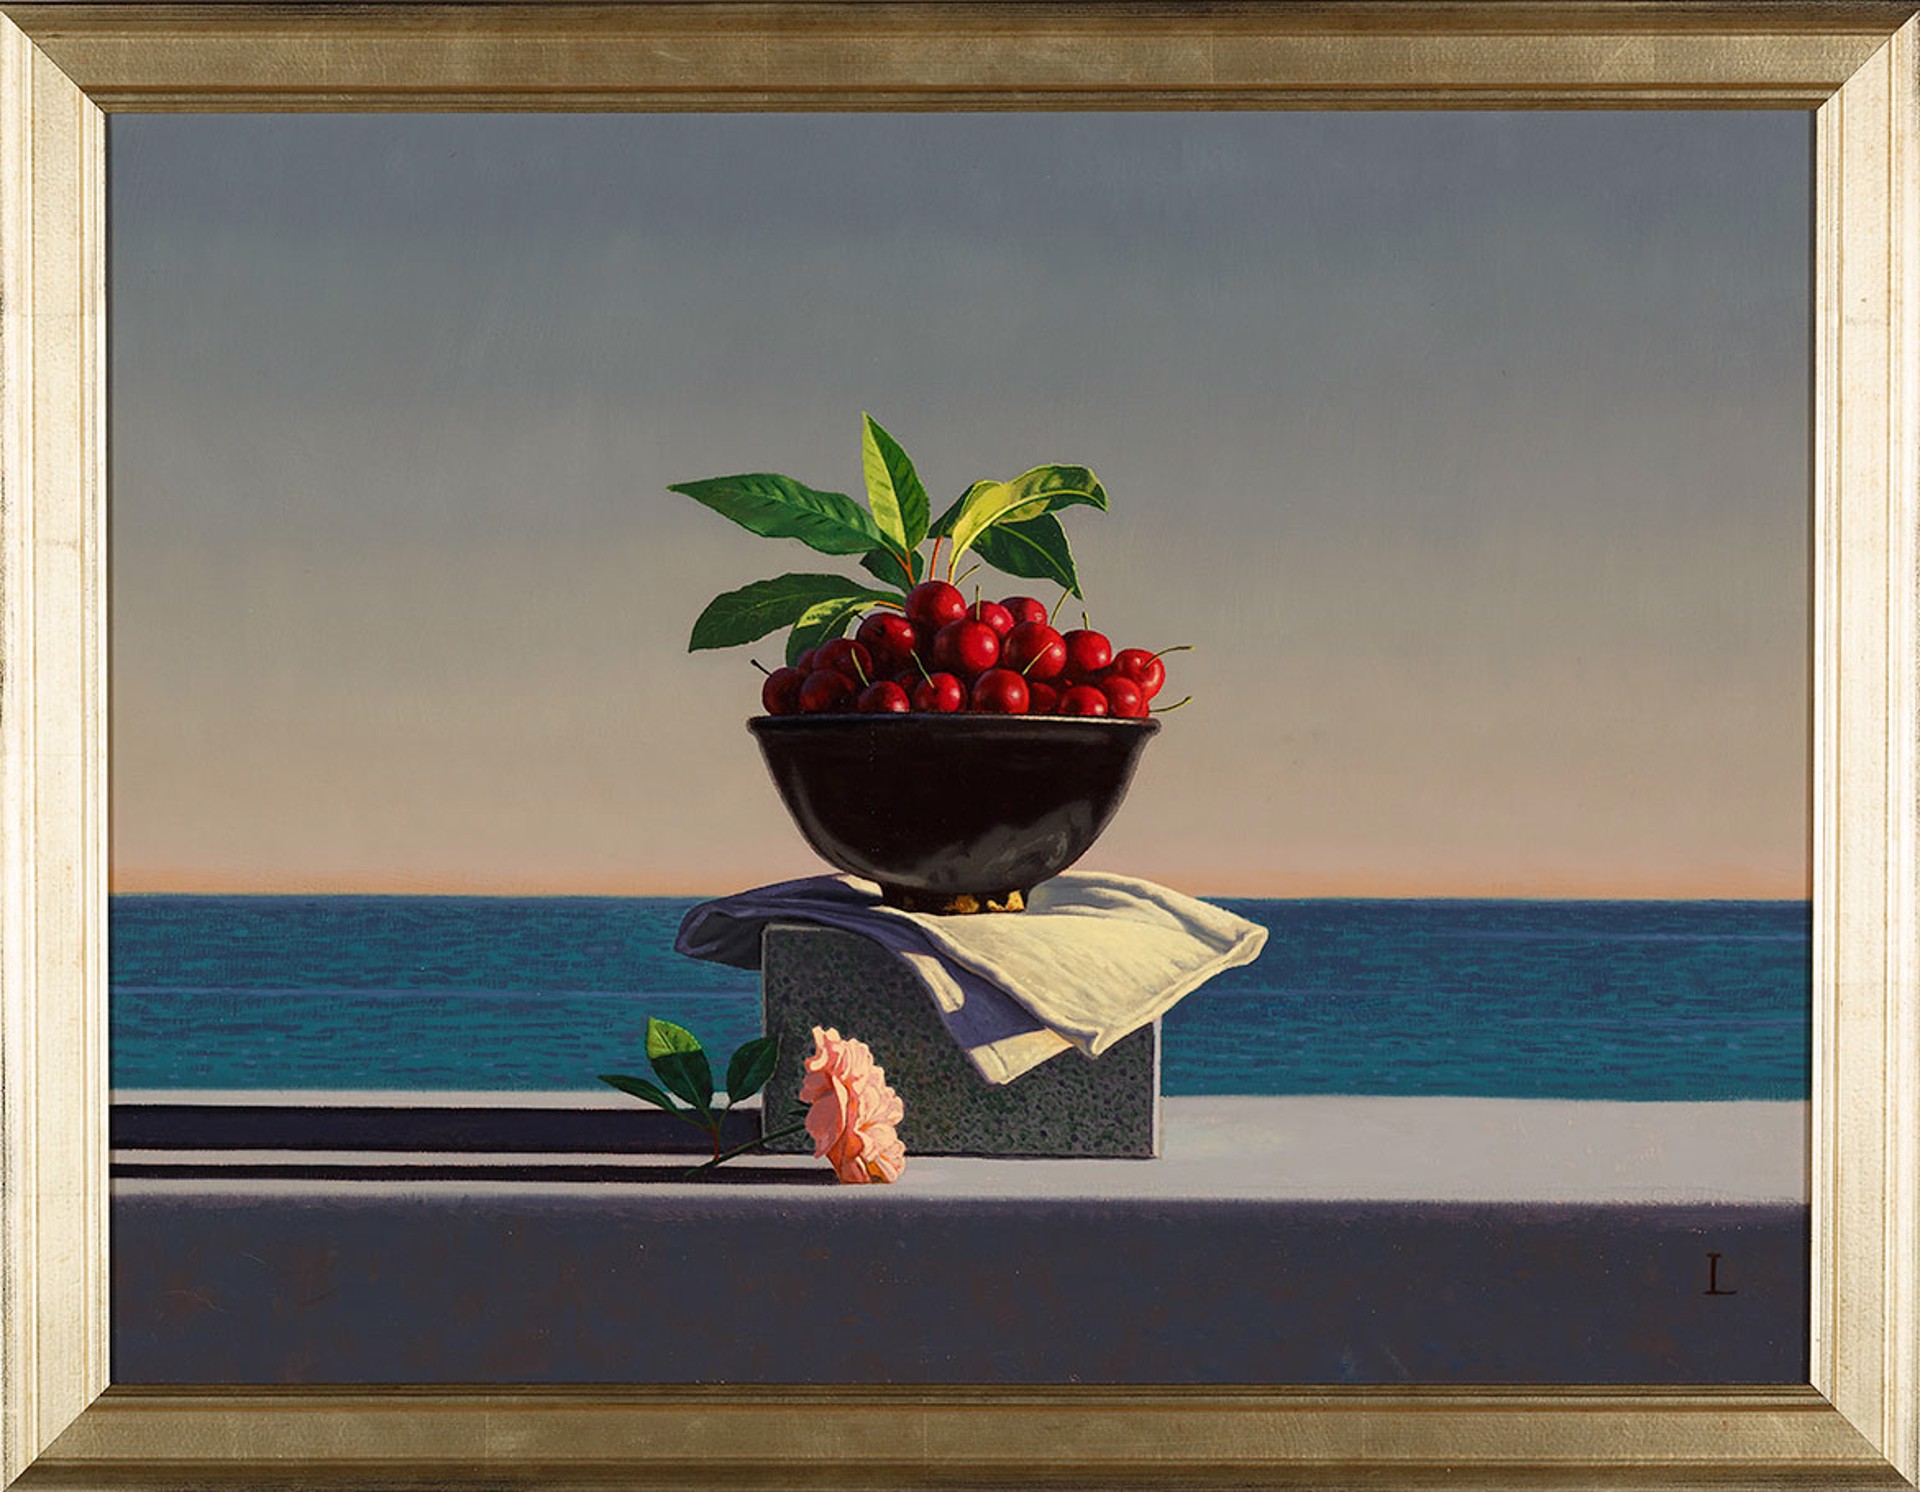 Offering: Cherries and Rose by David Ligare